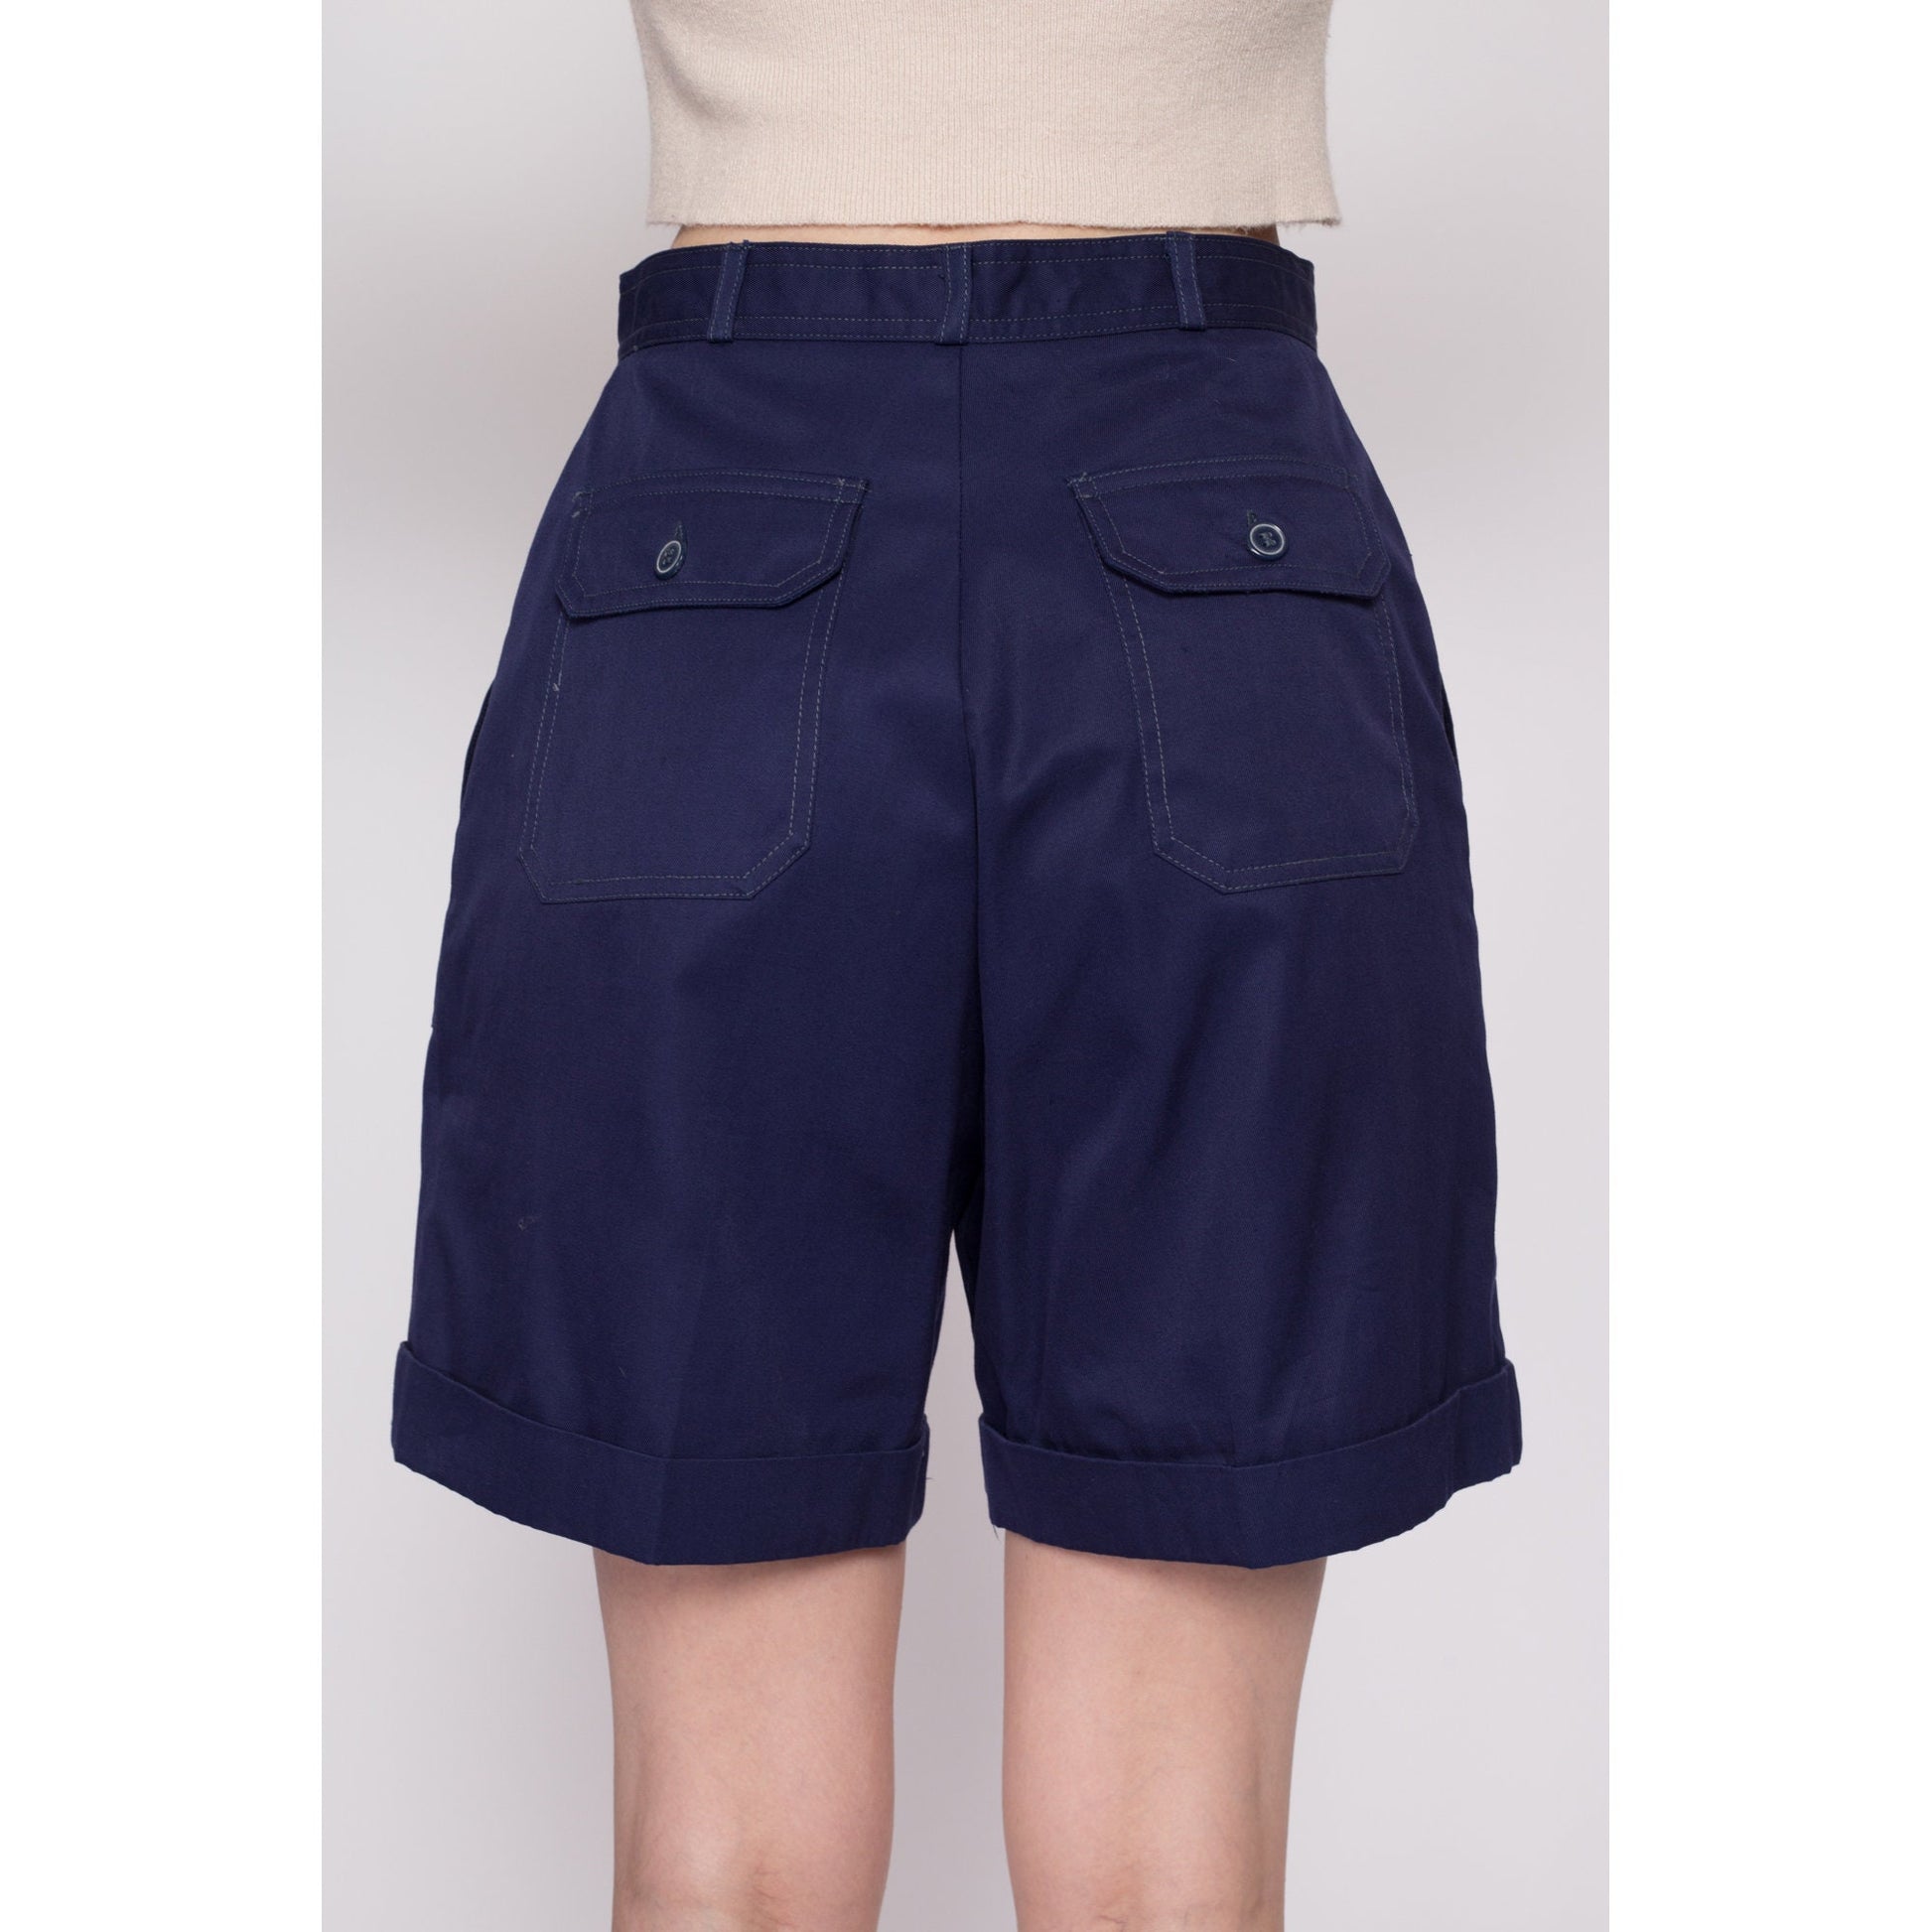 Small 80s High Waisted Navy Blue Pleated Shorts 27" | Vintage Casual Plain Cuffed Shorts